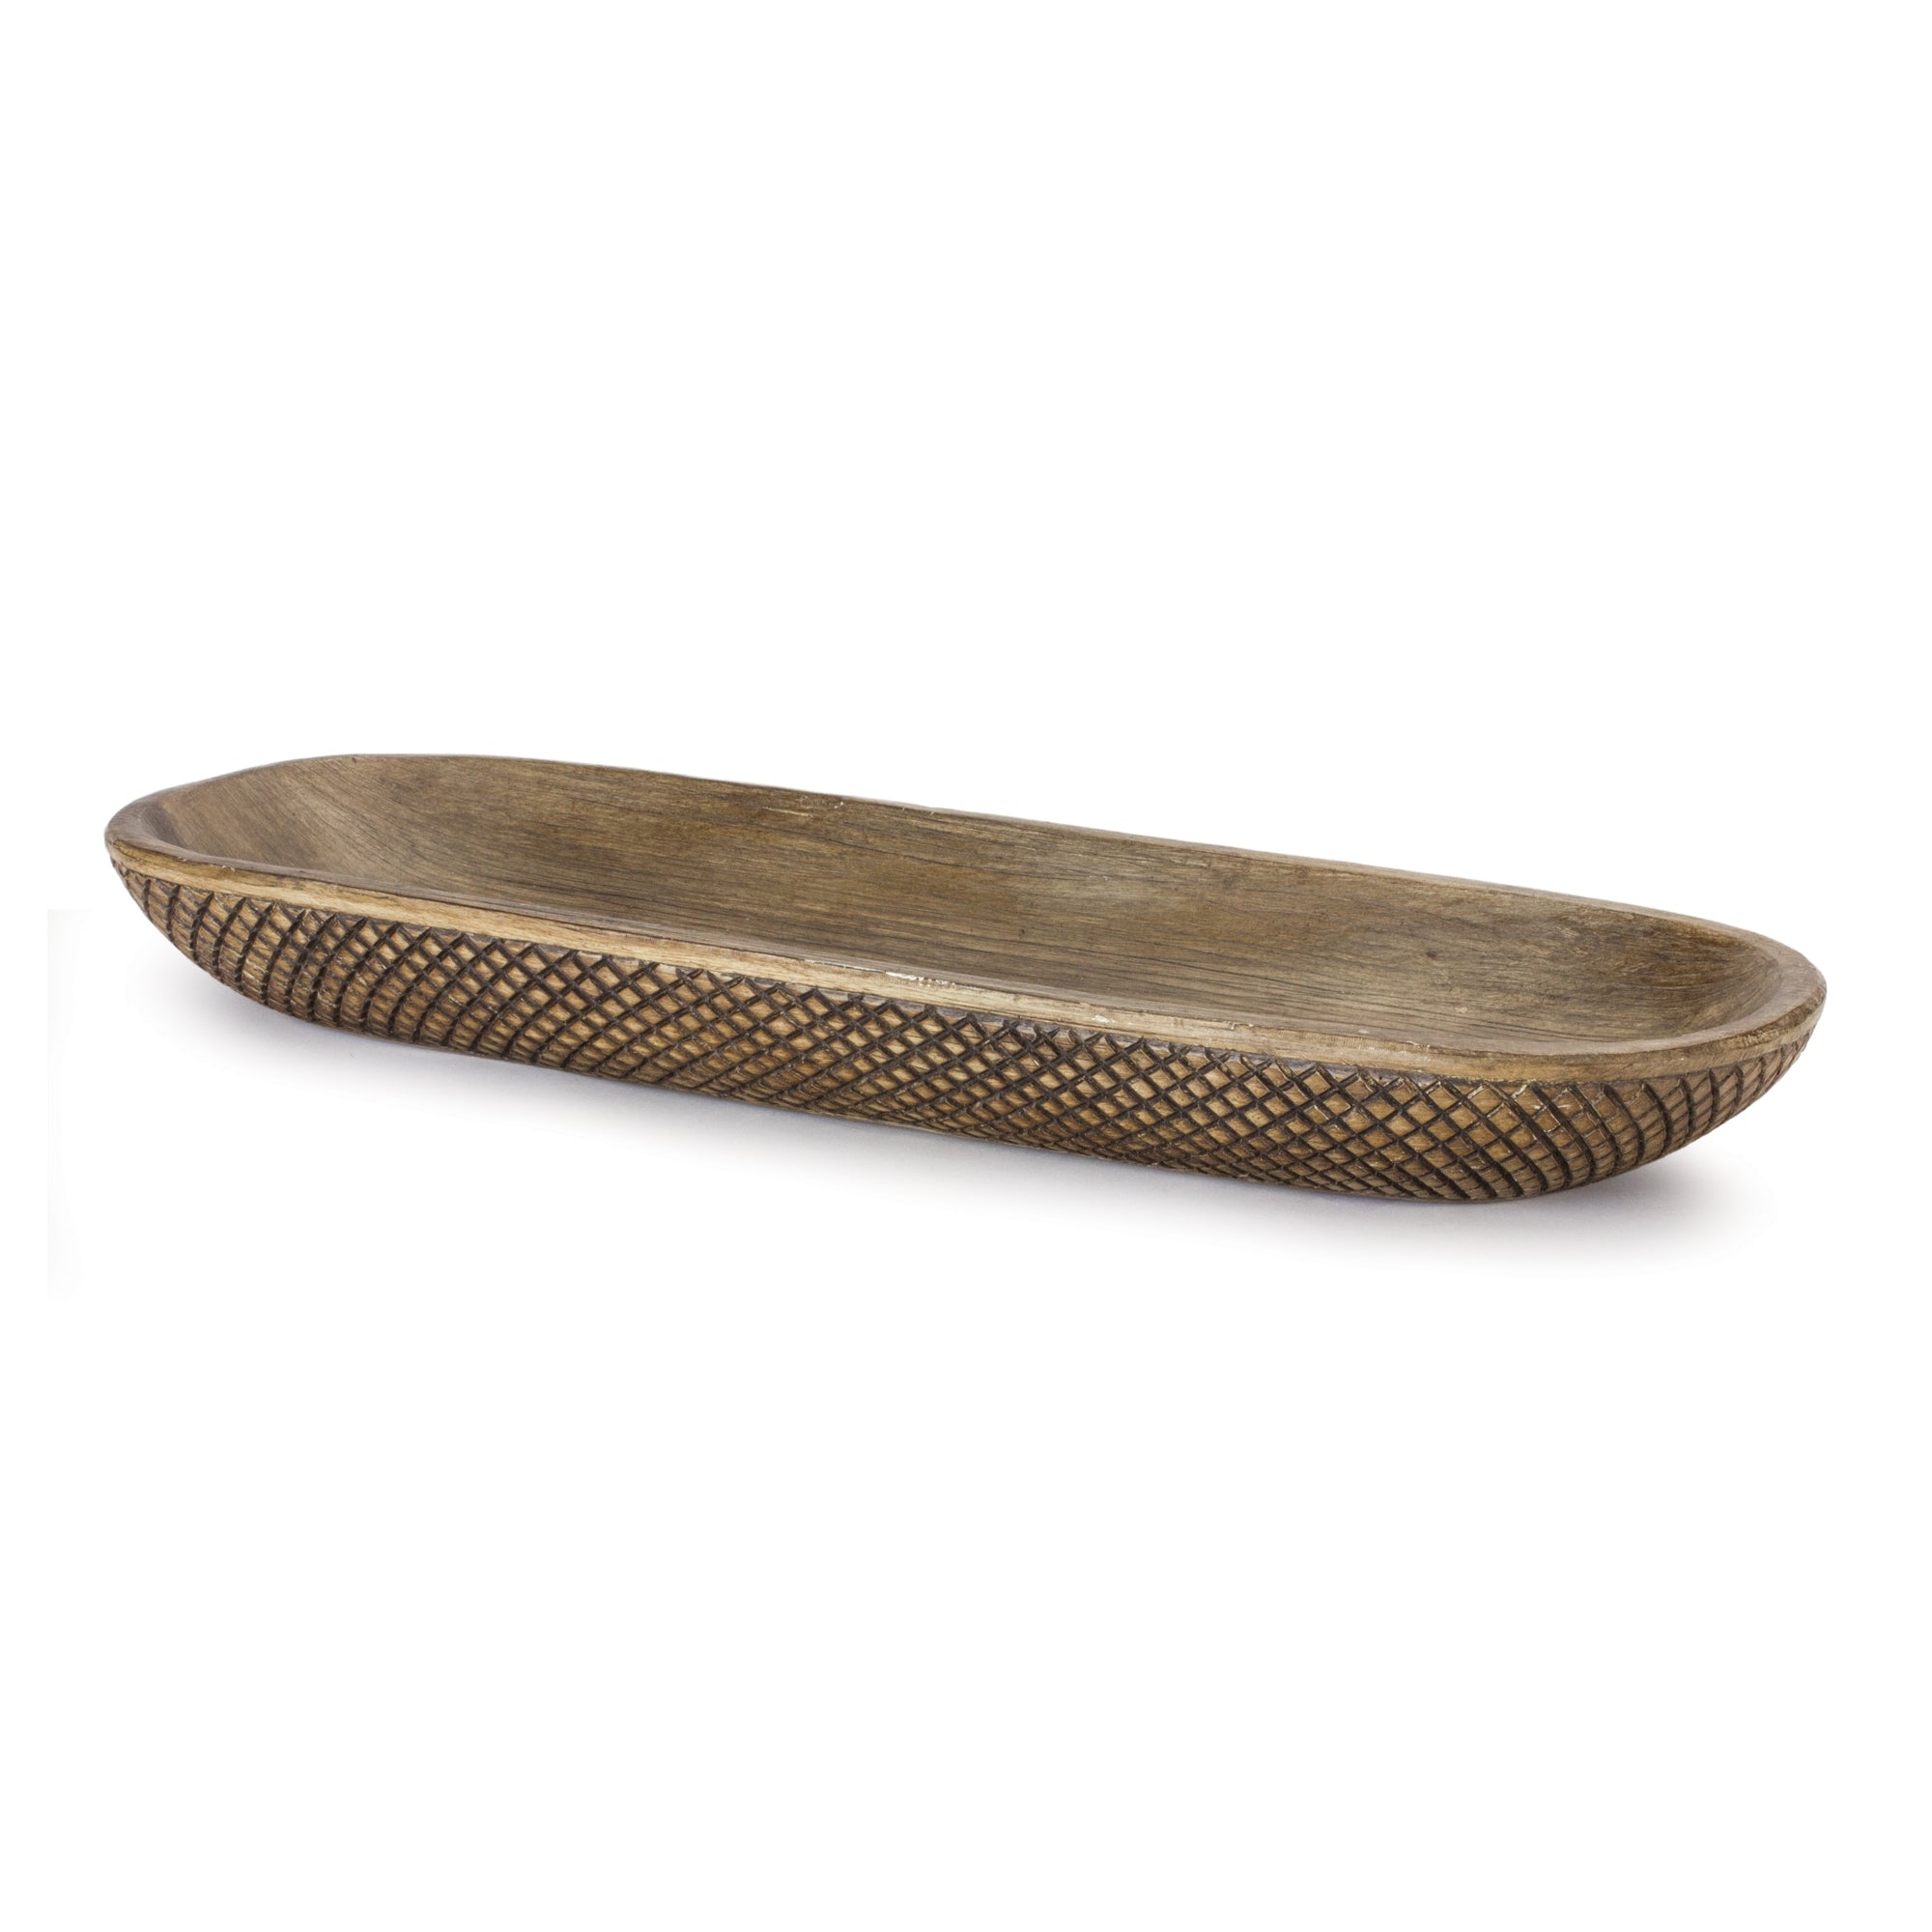 Etched Dough Bowl Tray (Set of 2)